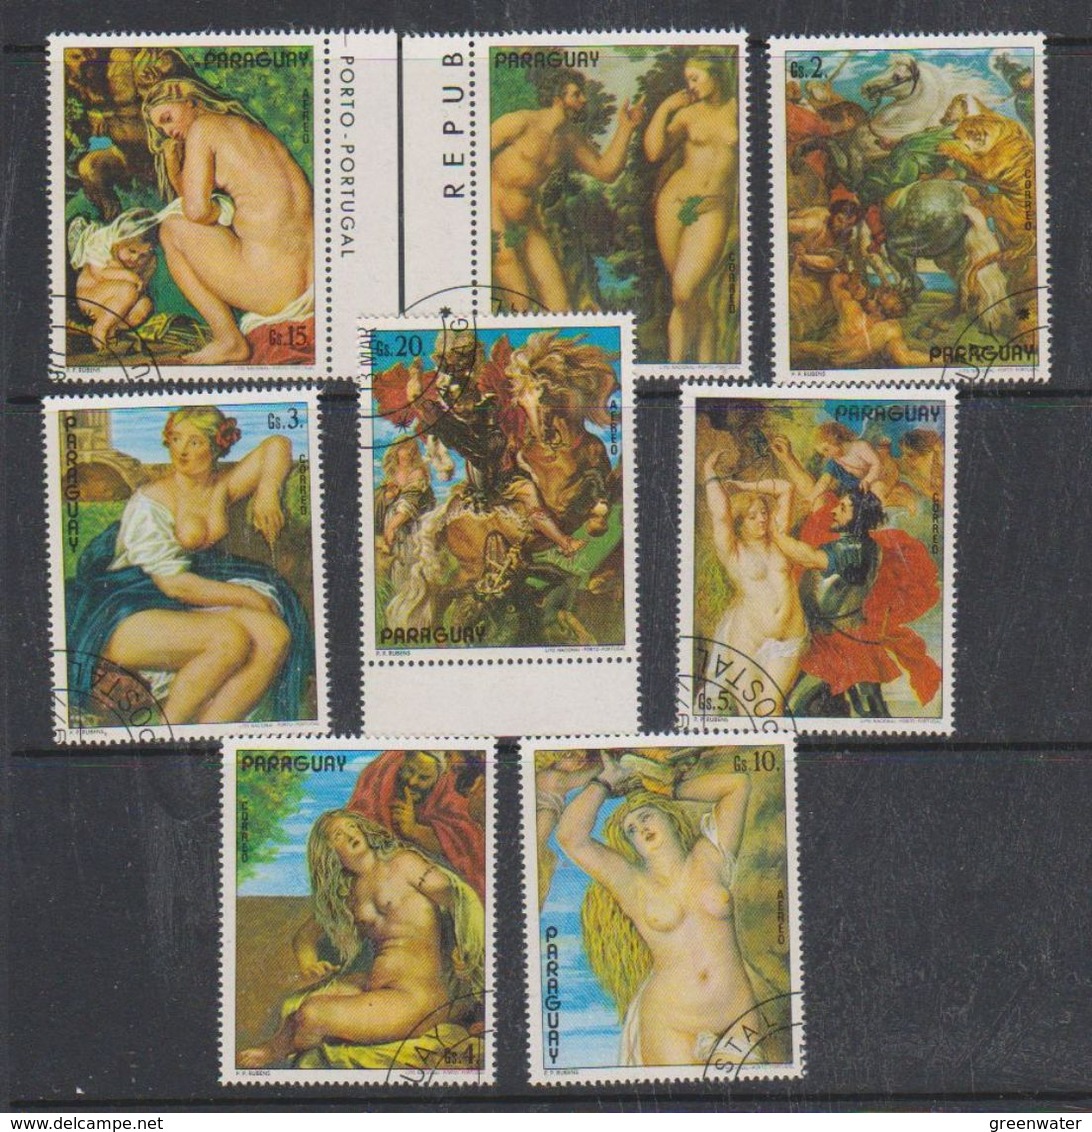 Paraguay 1977 P.P. Rubens / Nudes 7v Used Cto (38099) - Paraguay